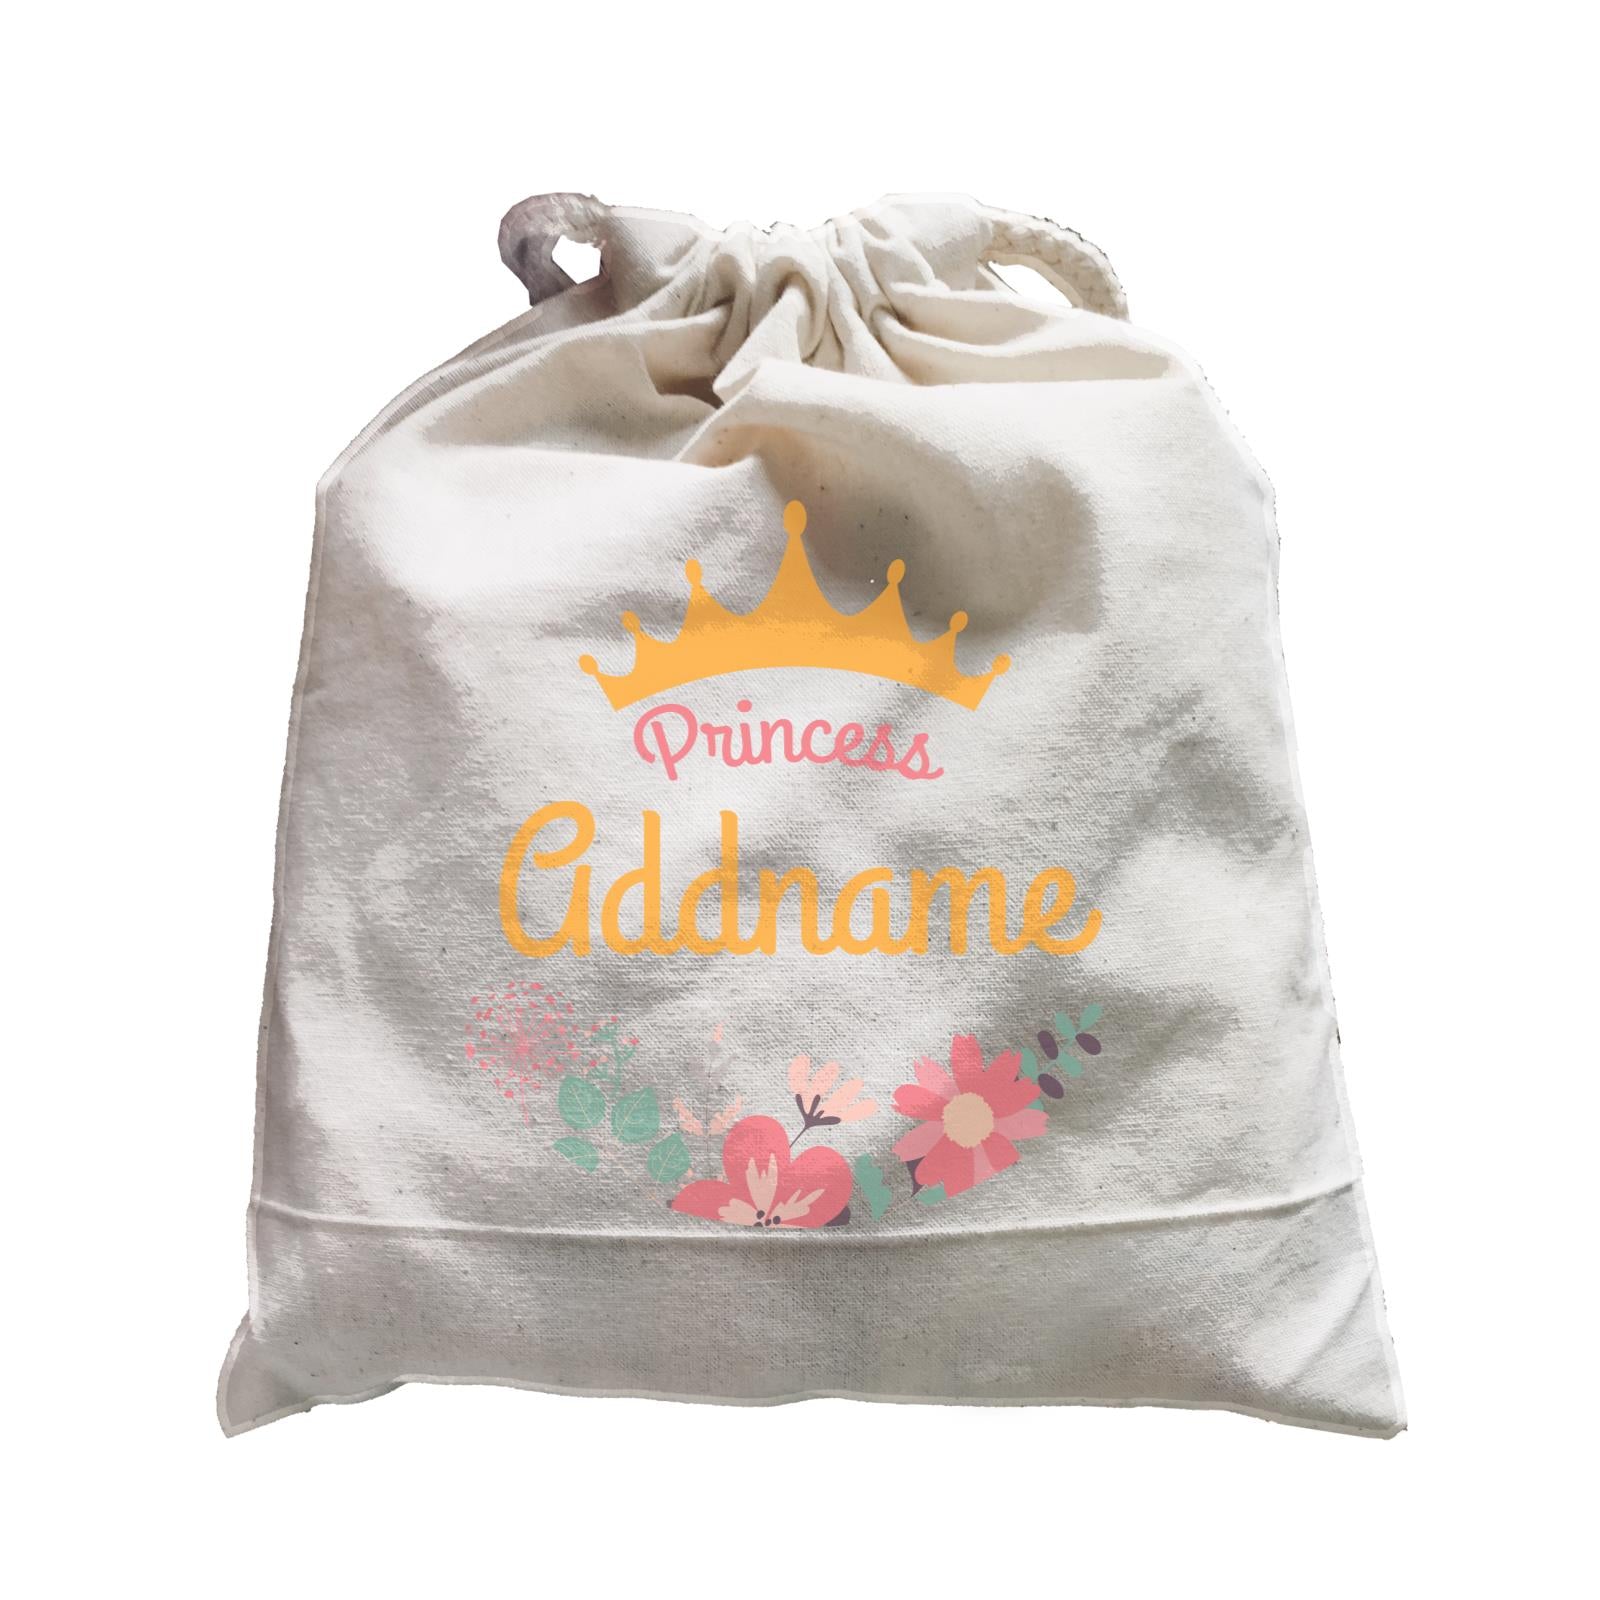 Princess Addname with Tiara and Flowers 2 Satchel